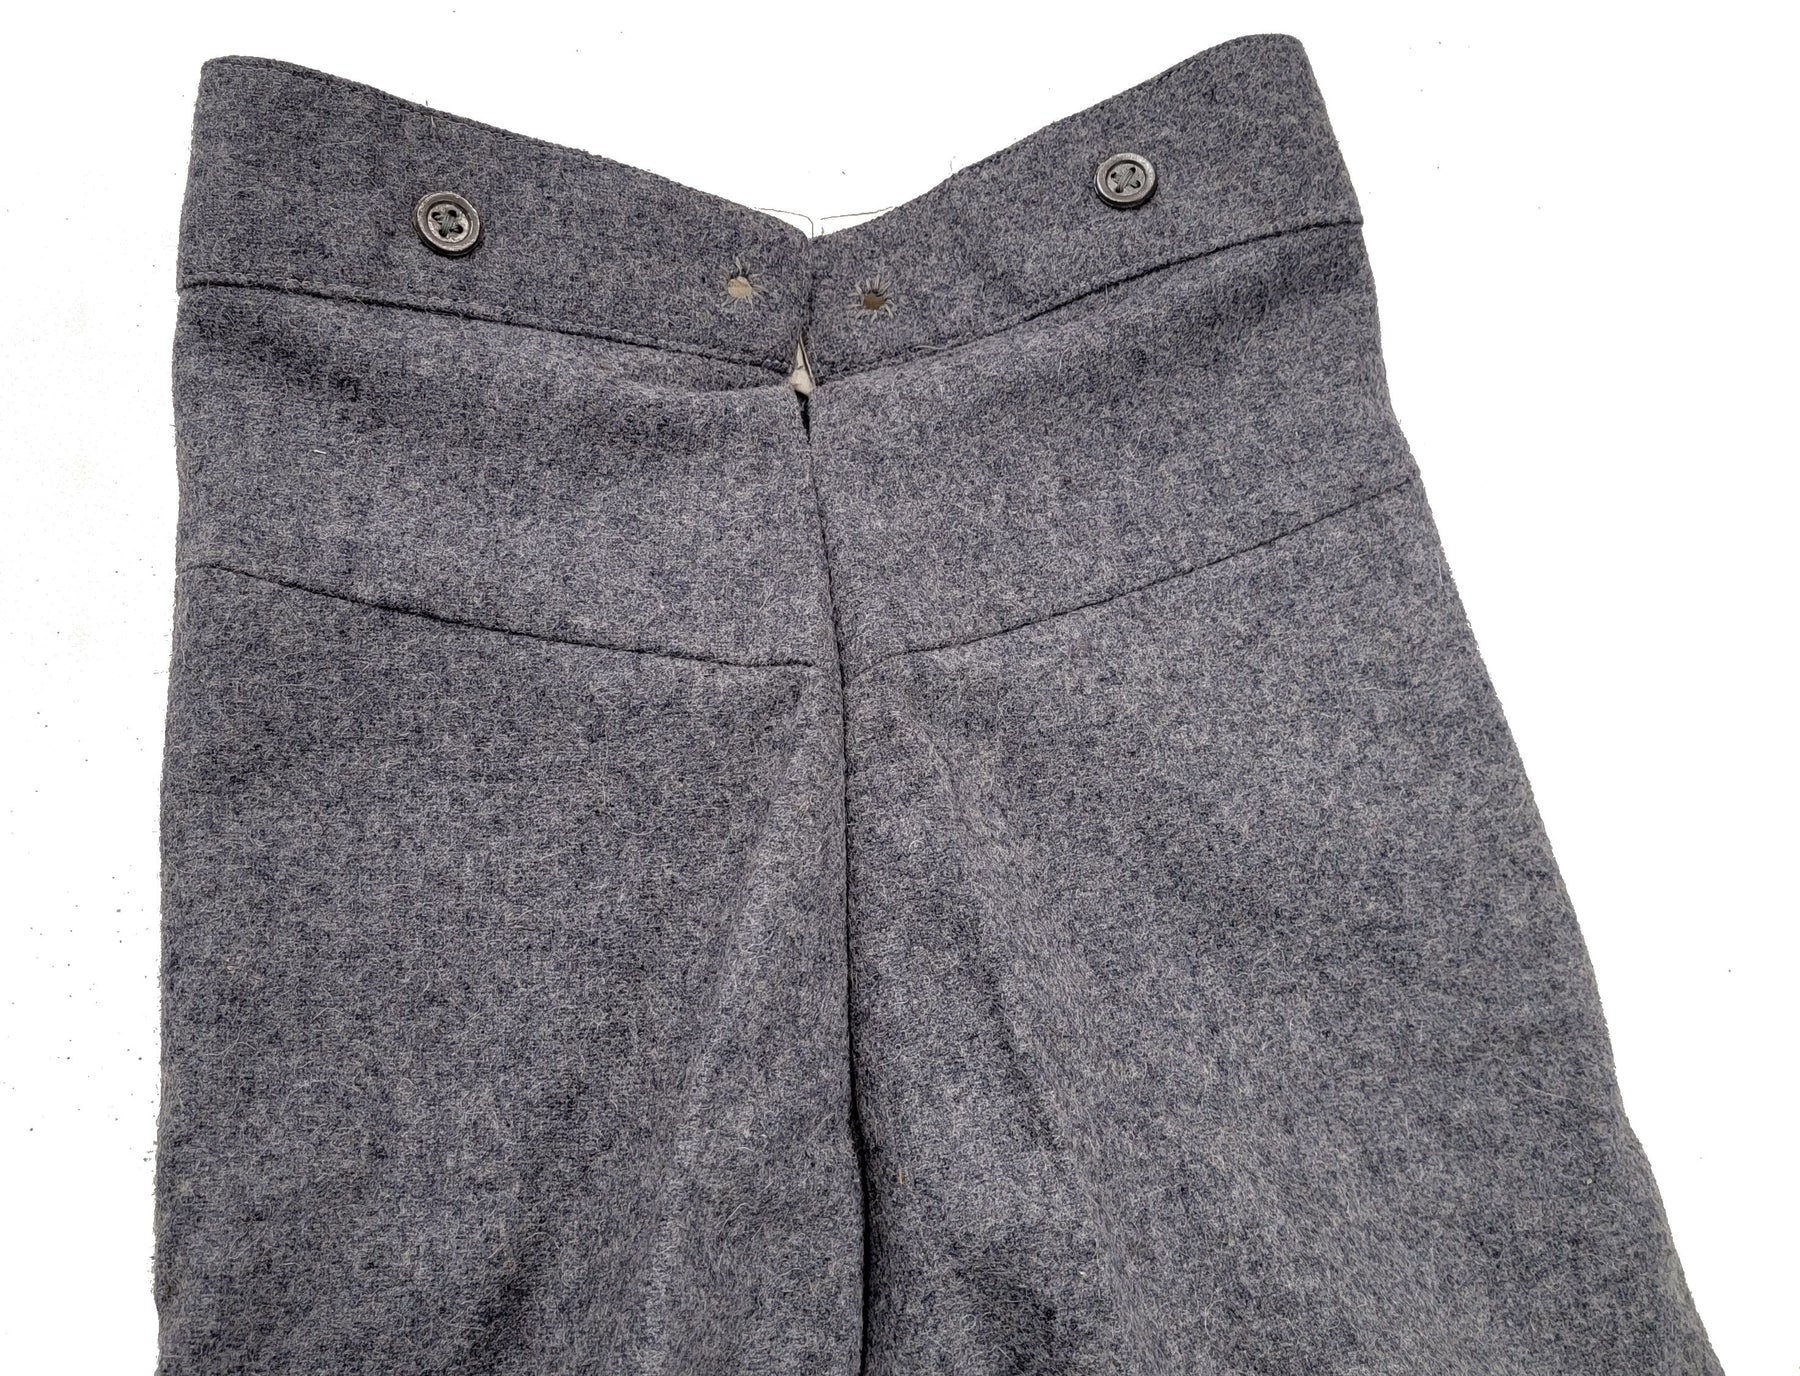 CLEARANCE - Kids Civil War Grey Trousers for Reenactments